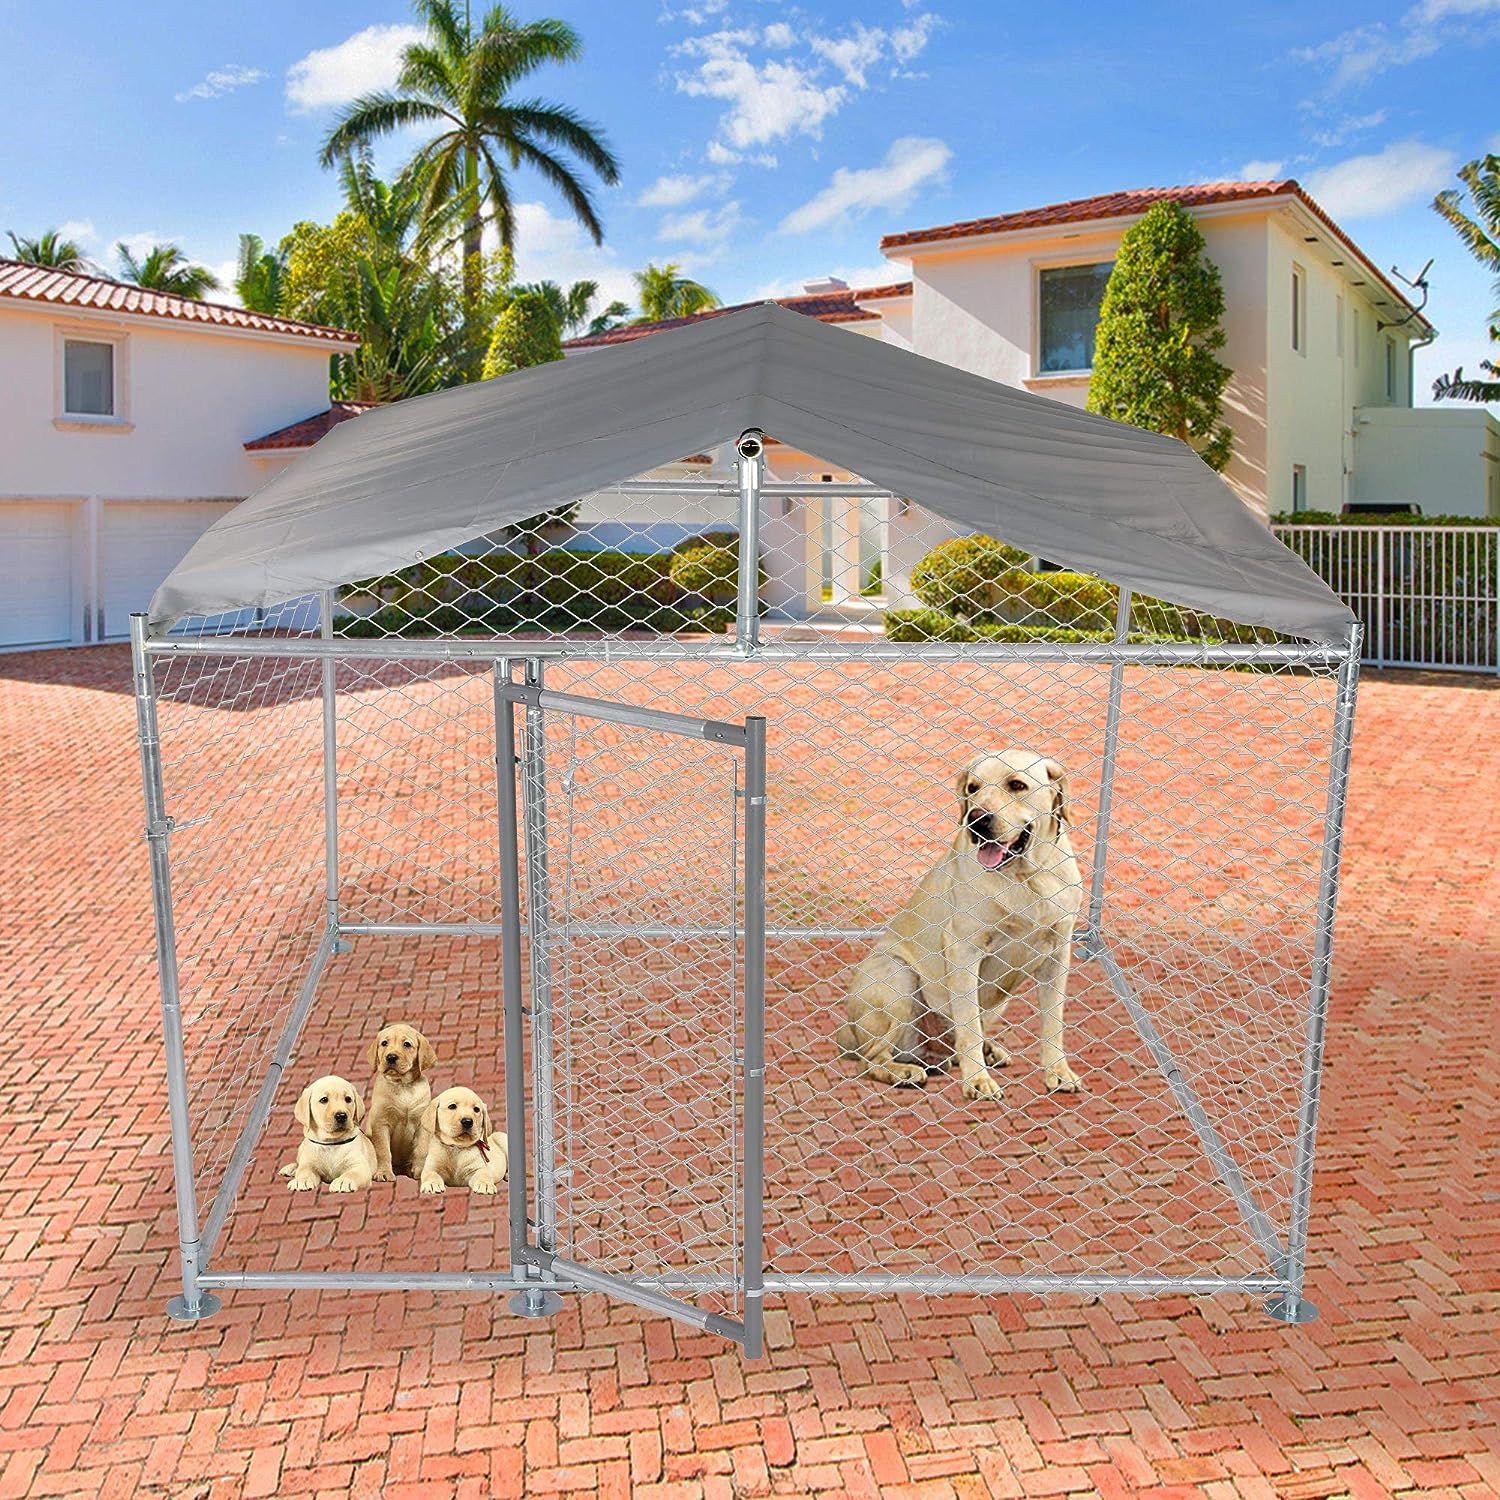 6.5'x6.5'x5' Outdoor Dog Kennel Galvanized Steel Pet Playpen with Waterproof Cover Secure Lock for Large Dog